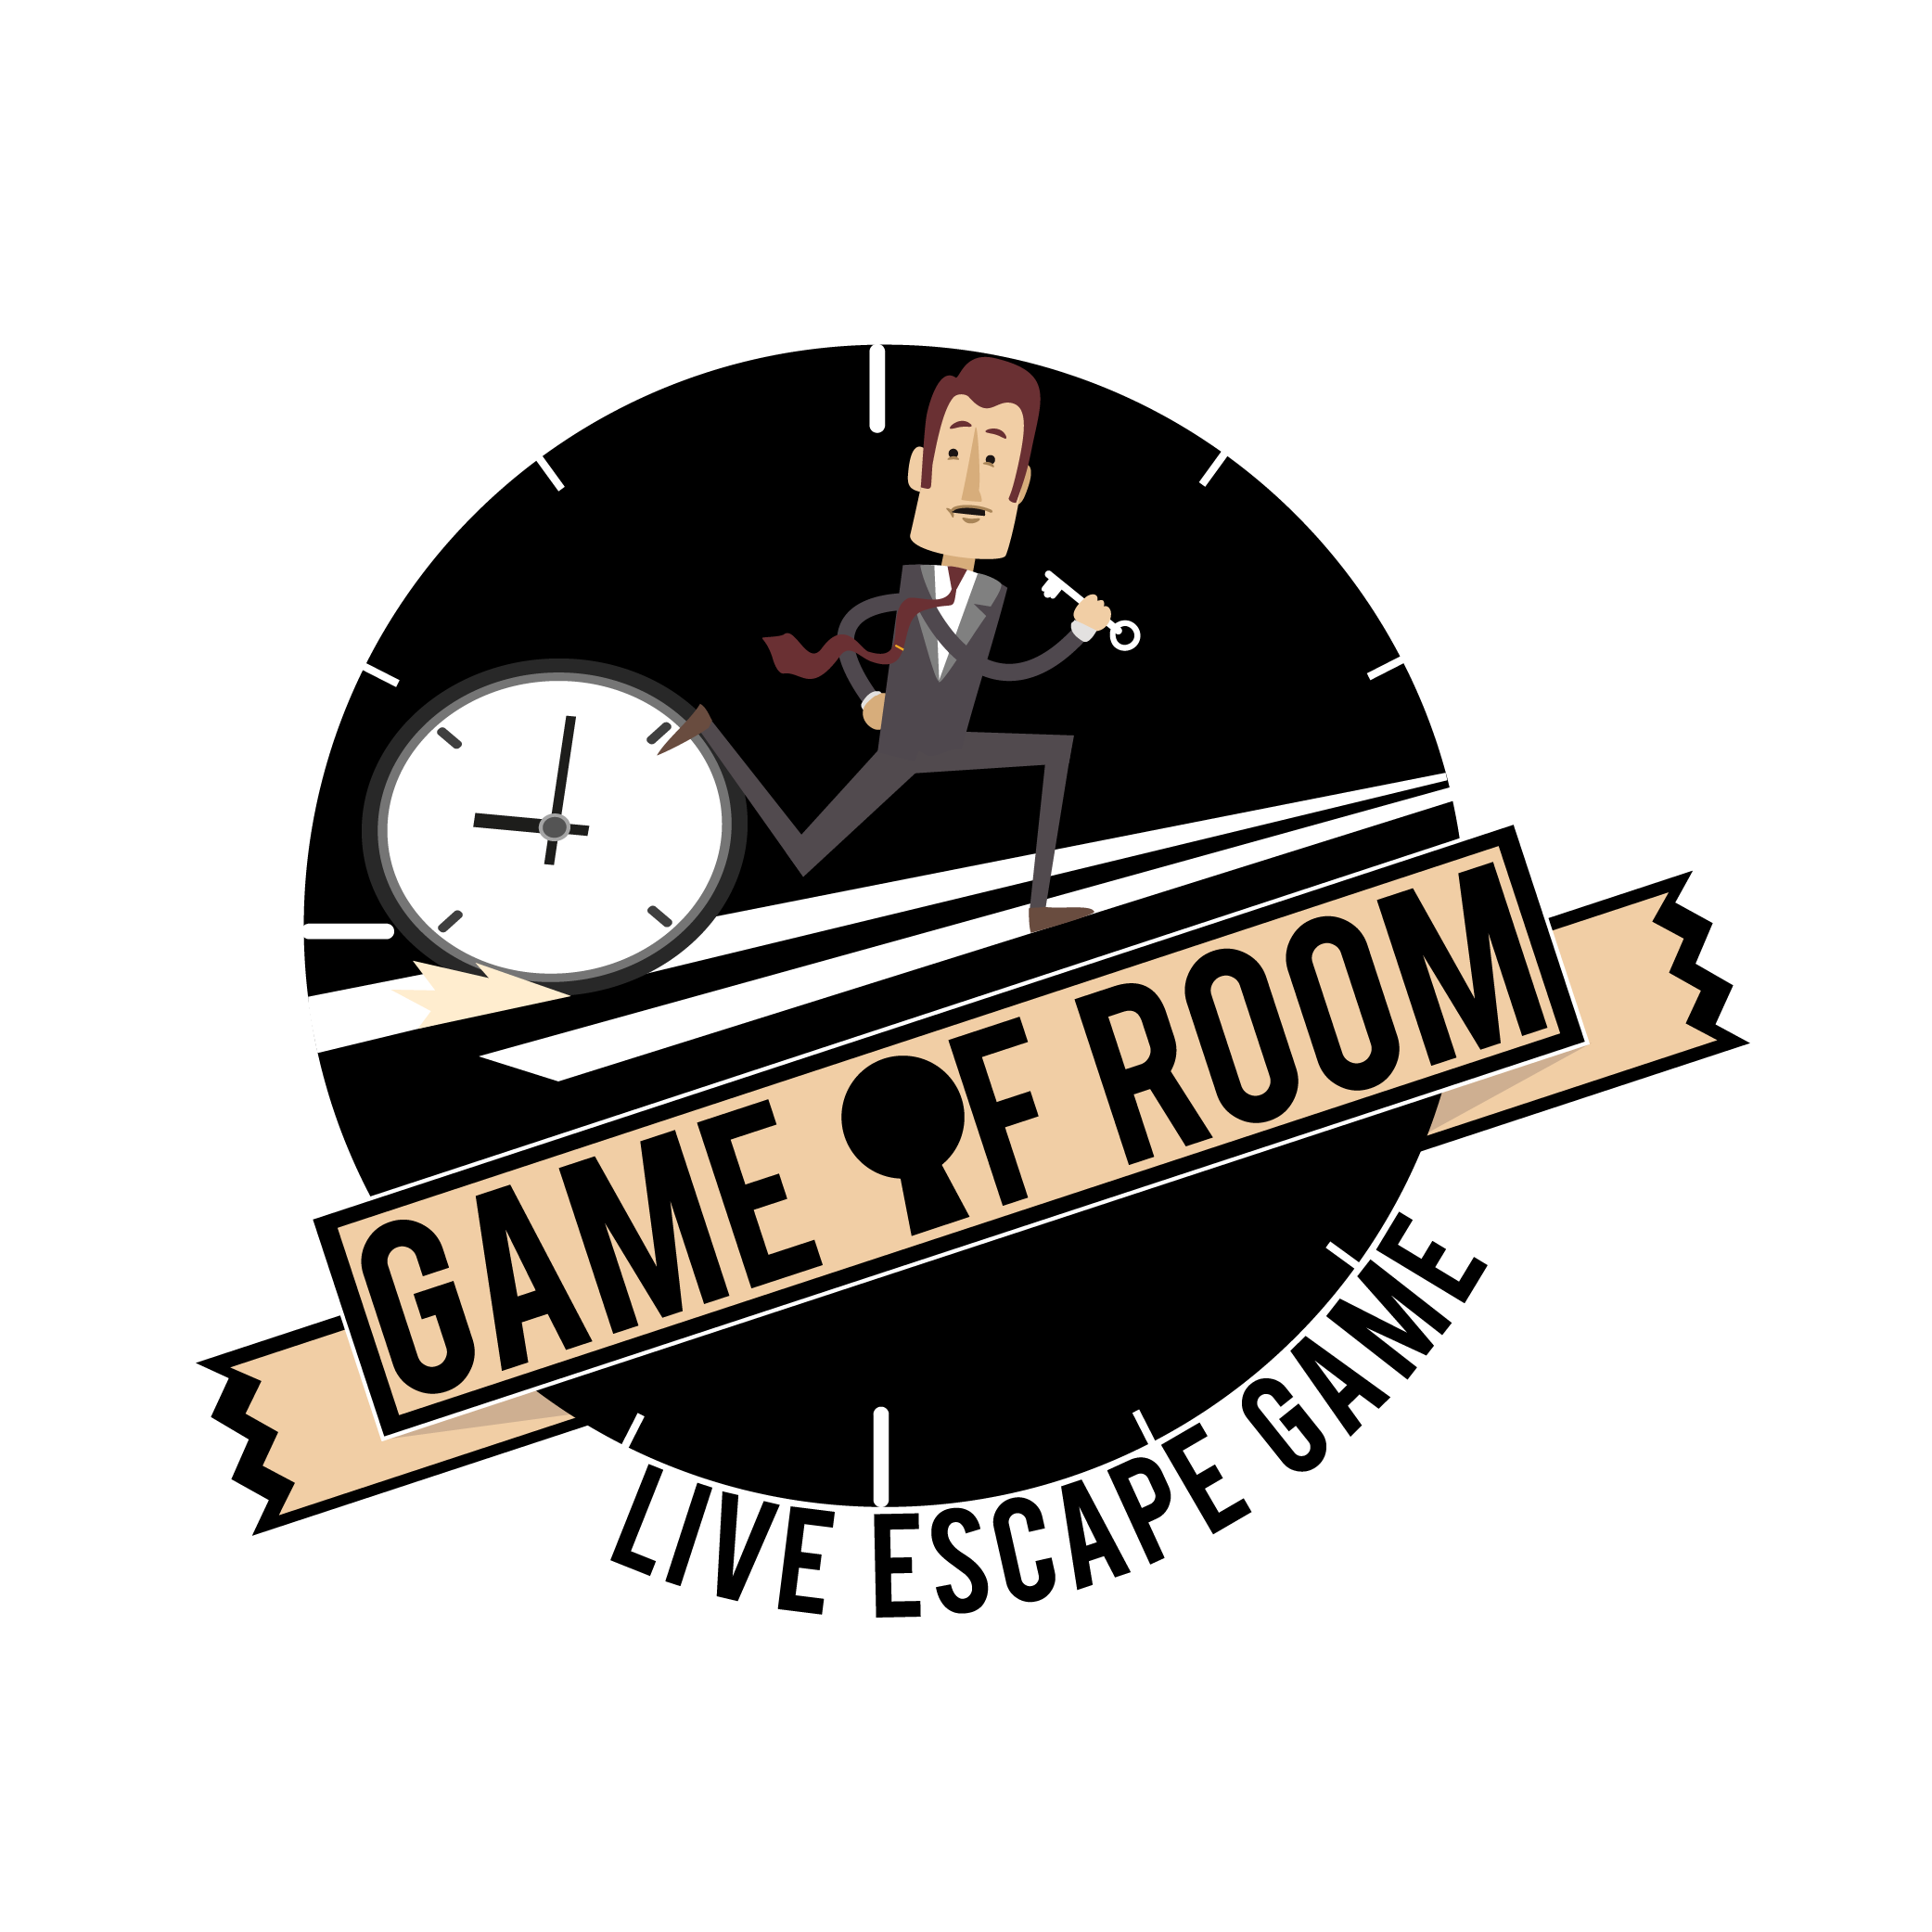 Game of room